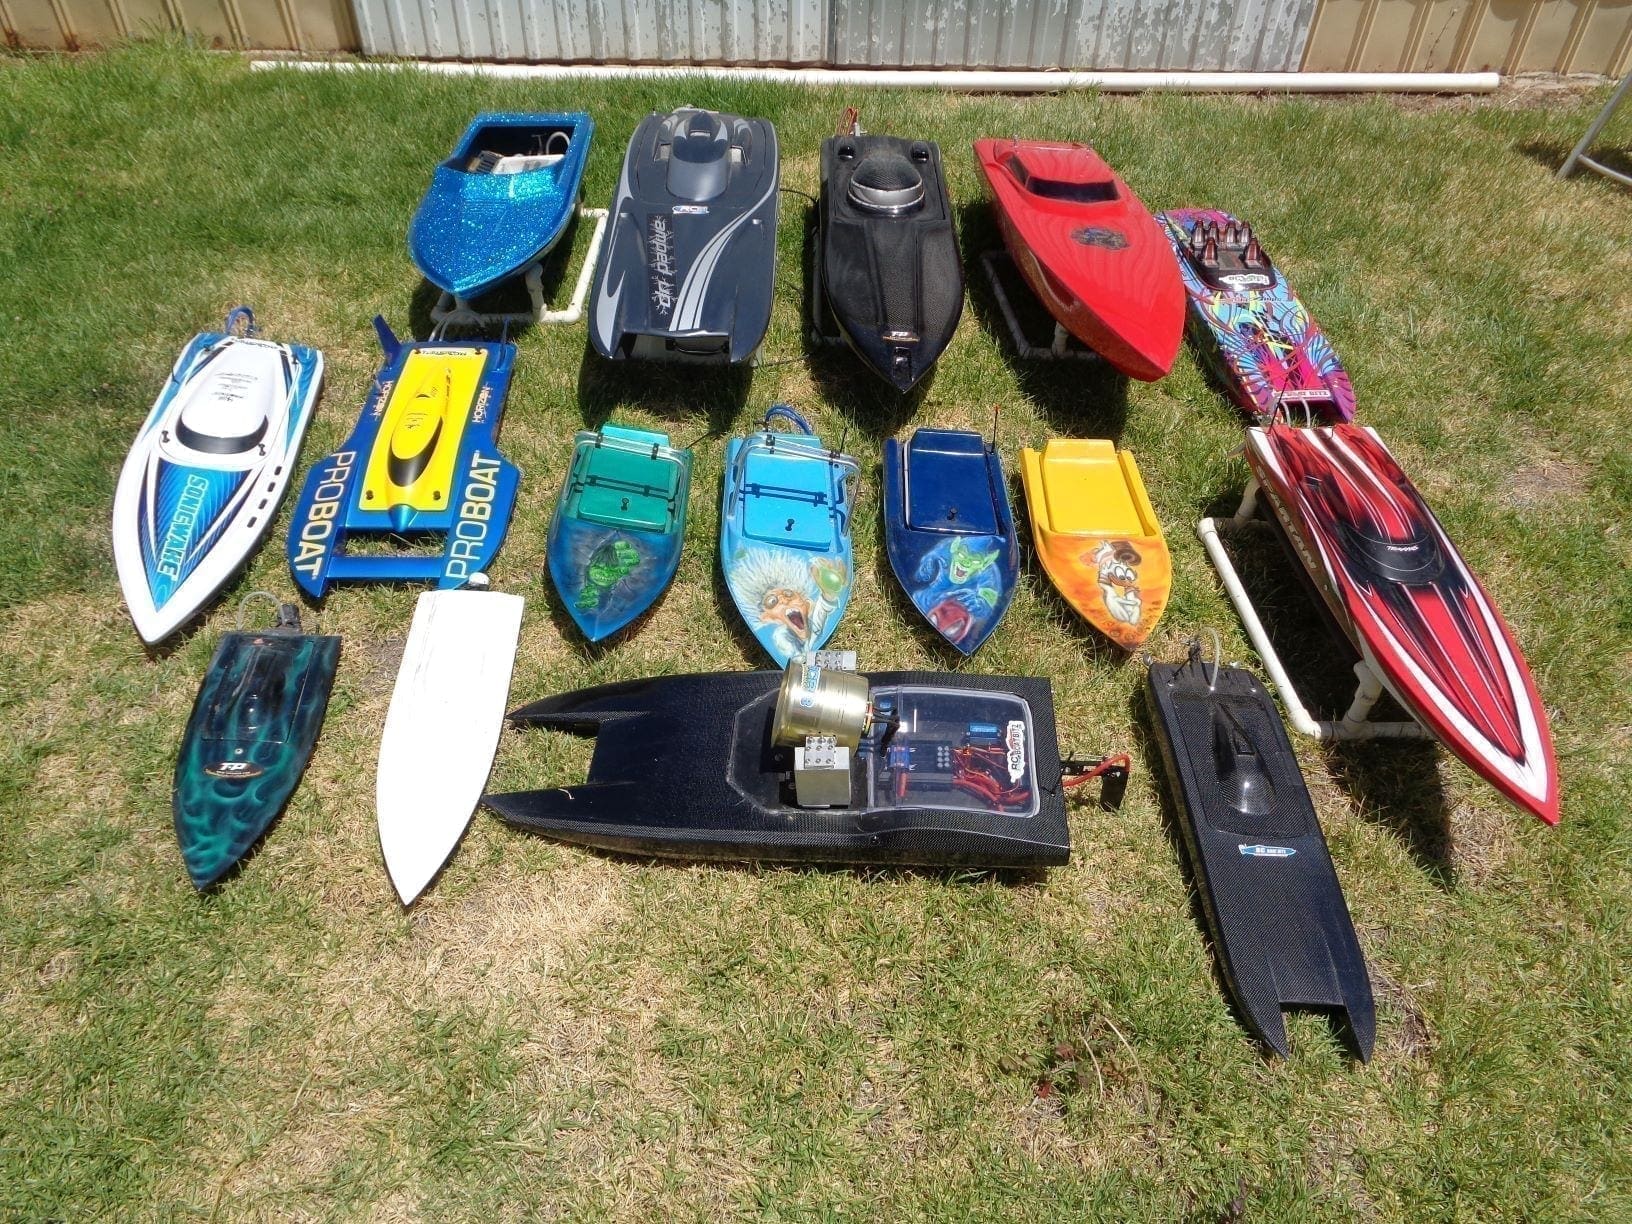 Some of my personal fleet